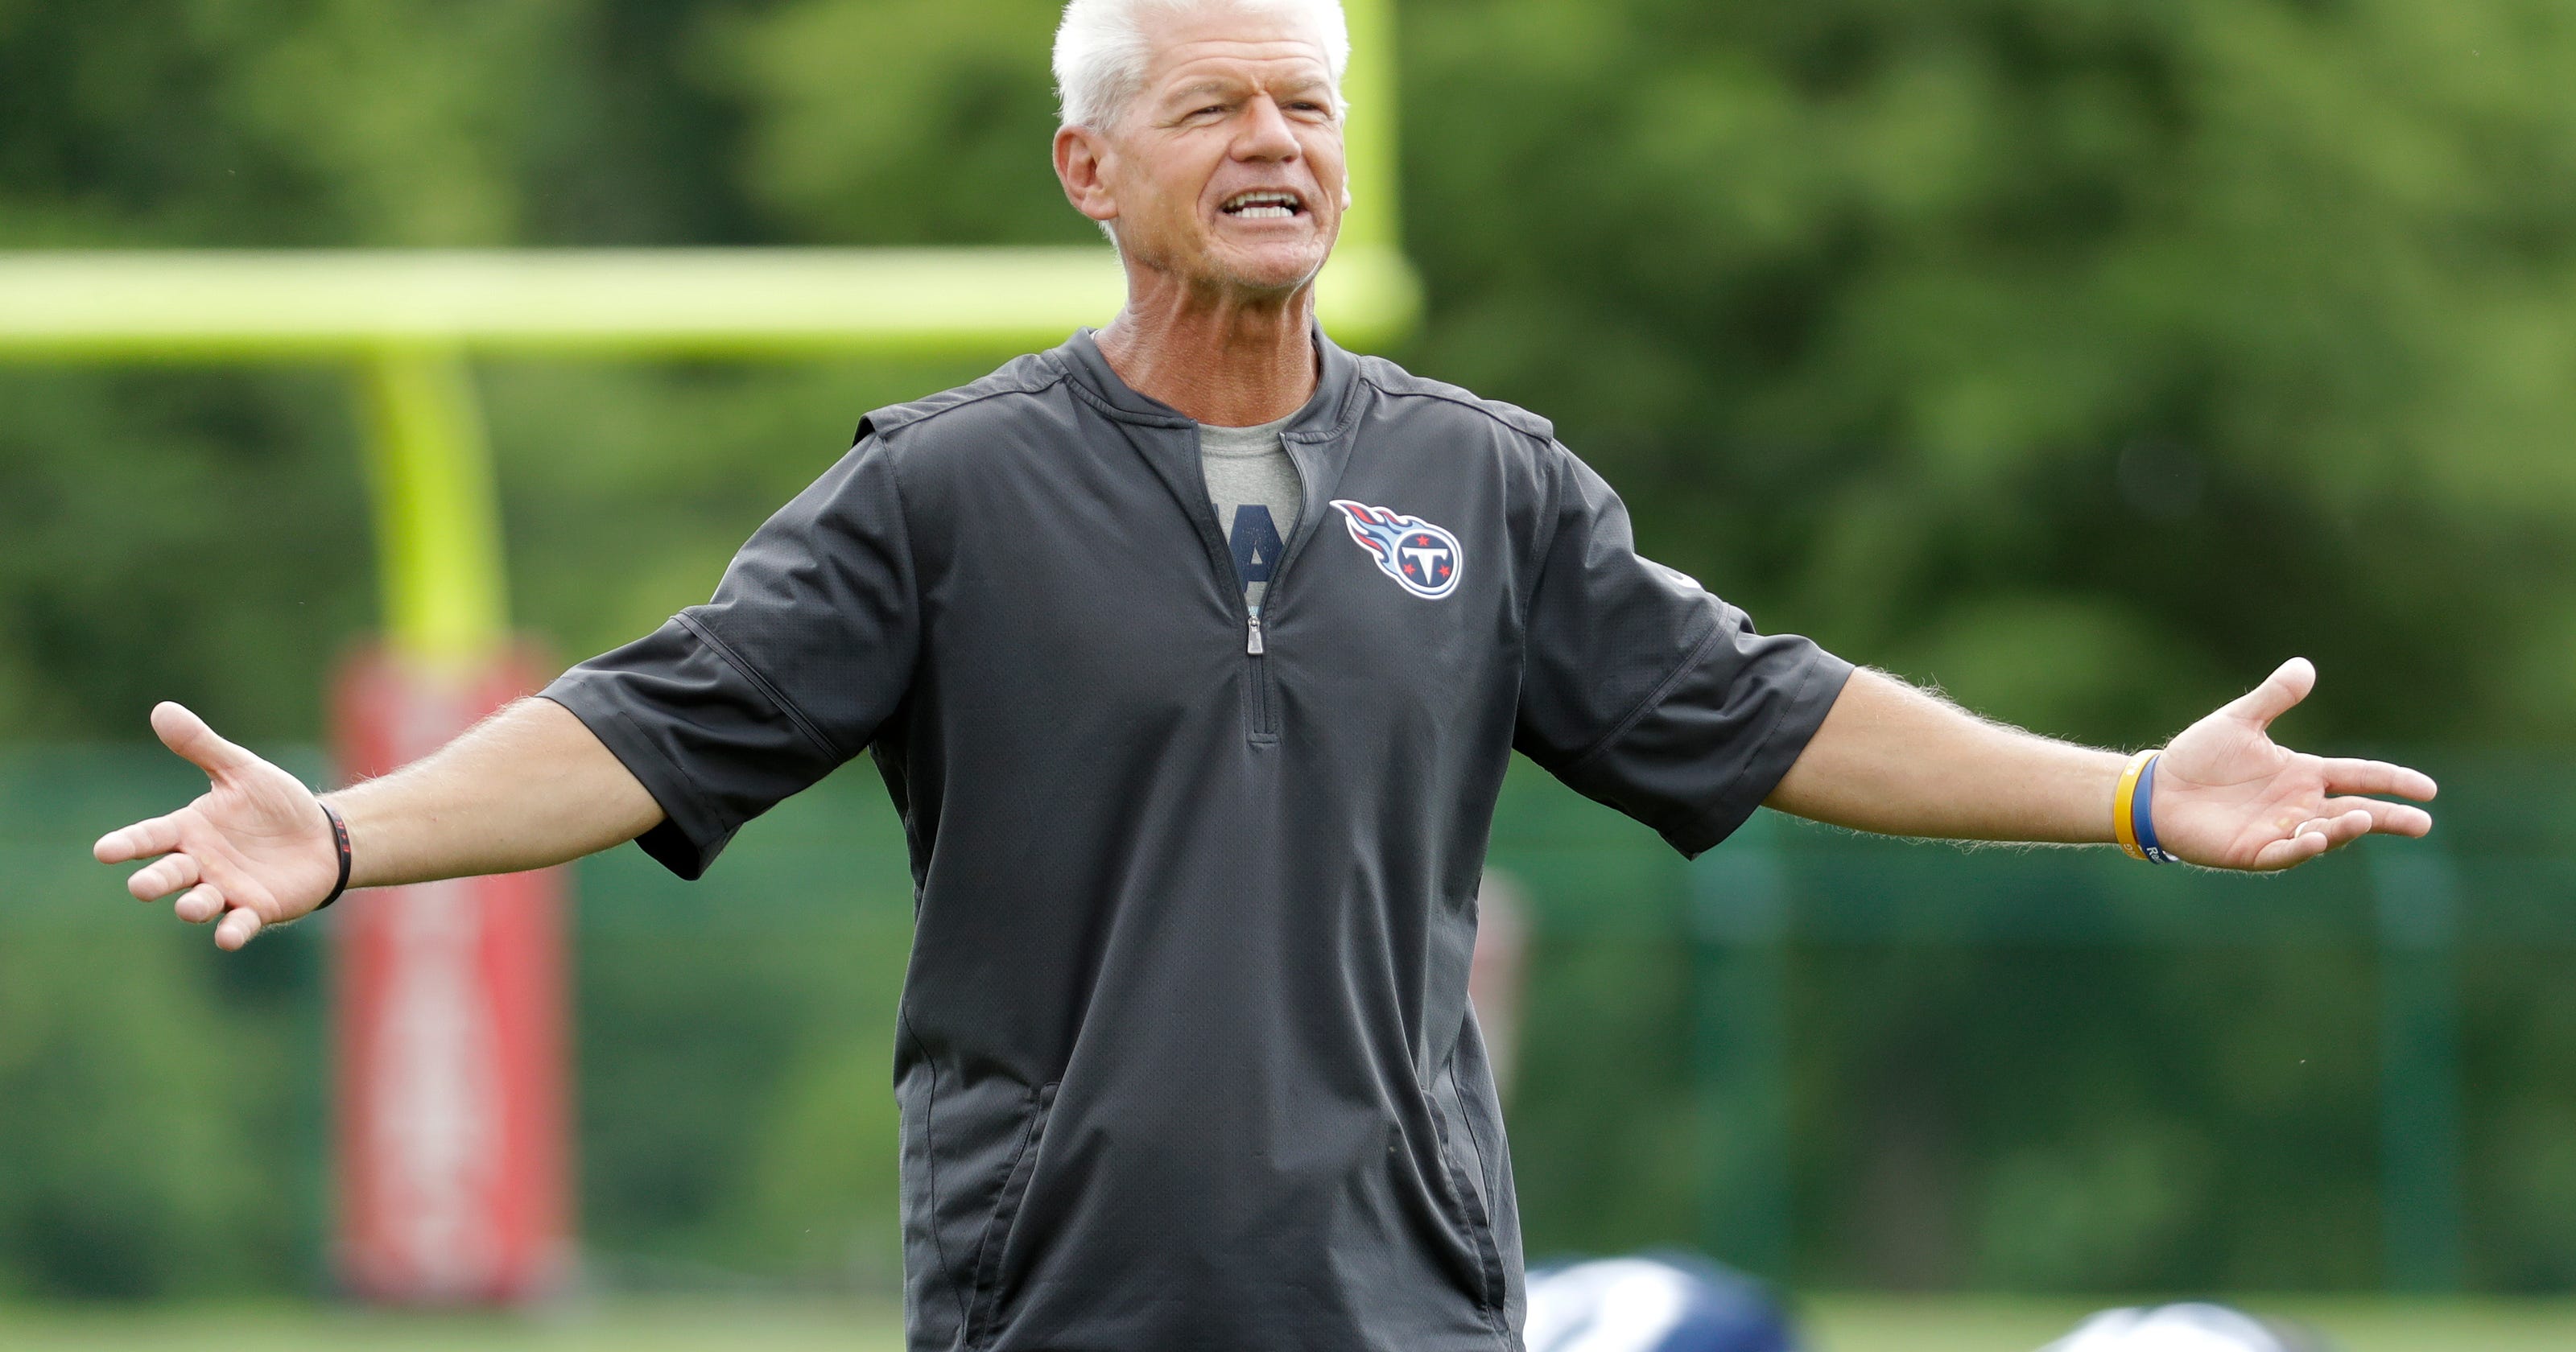 Kerry Coombs: Video shows coach's catch, score at Titans practice